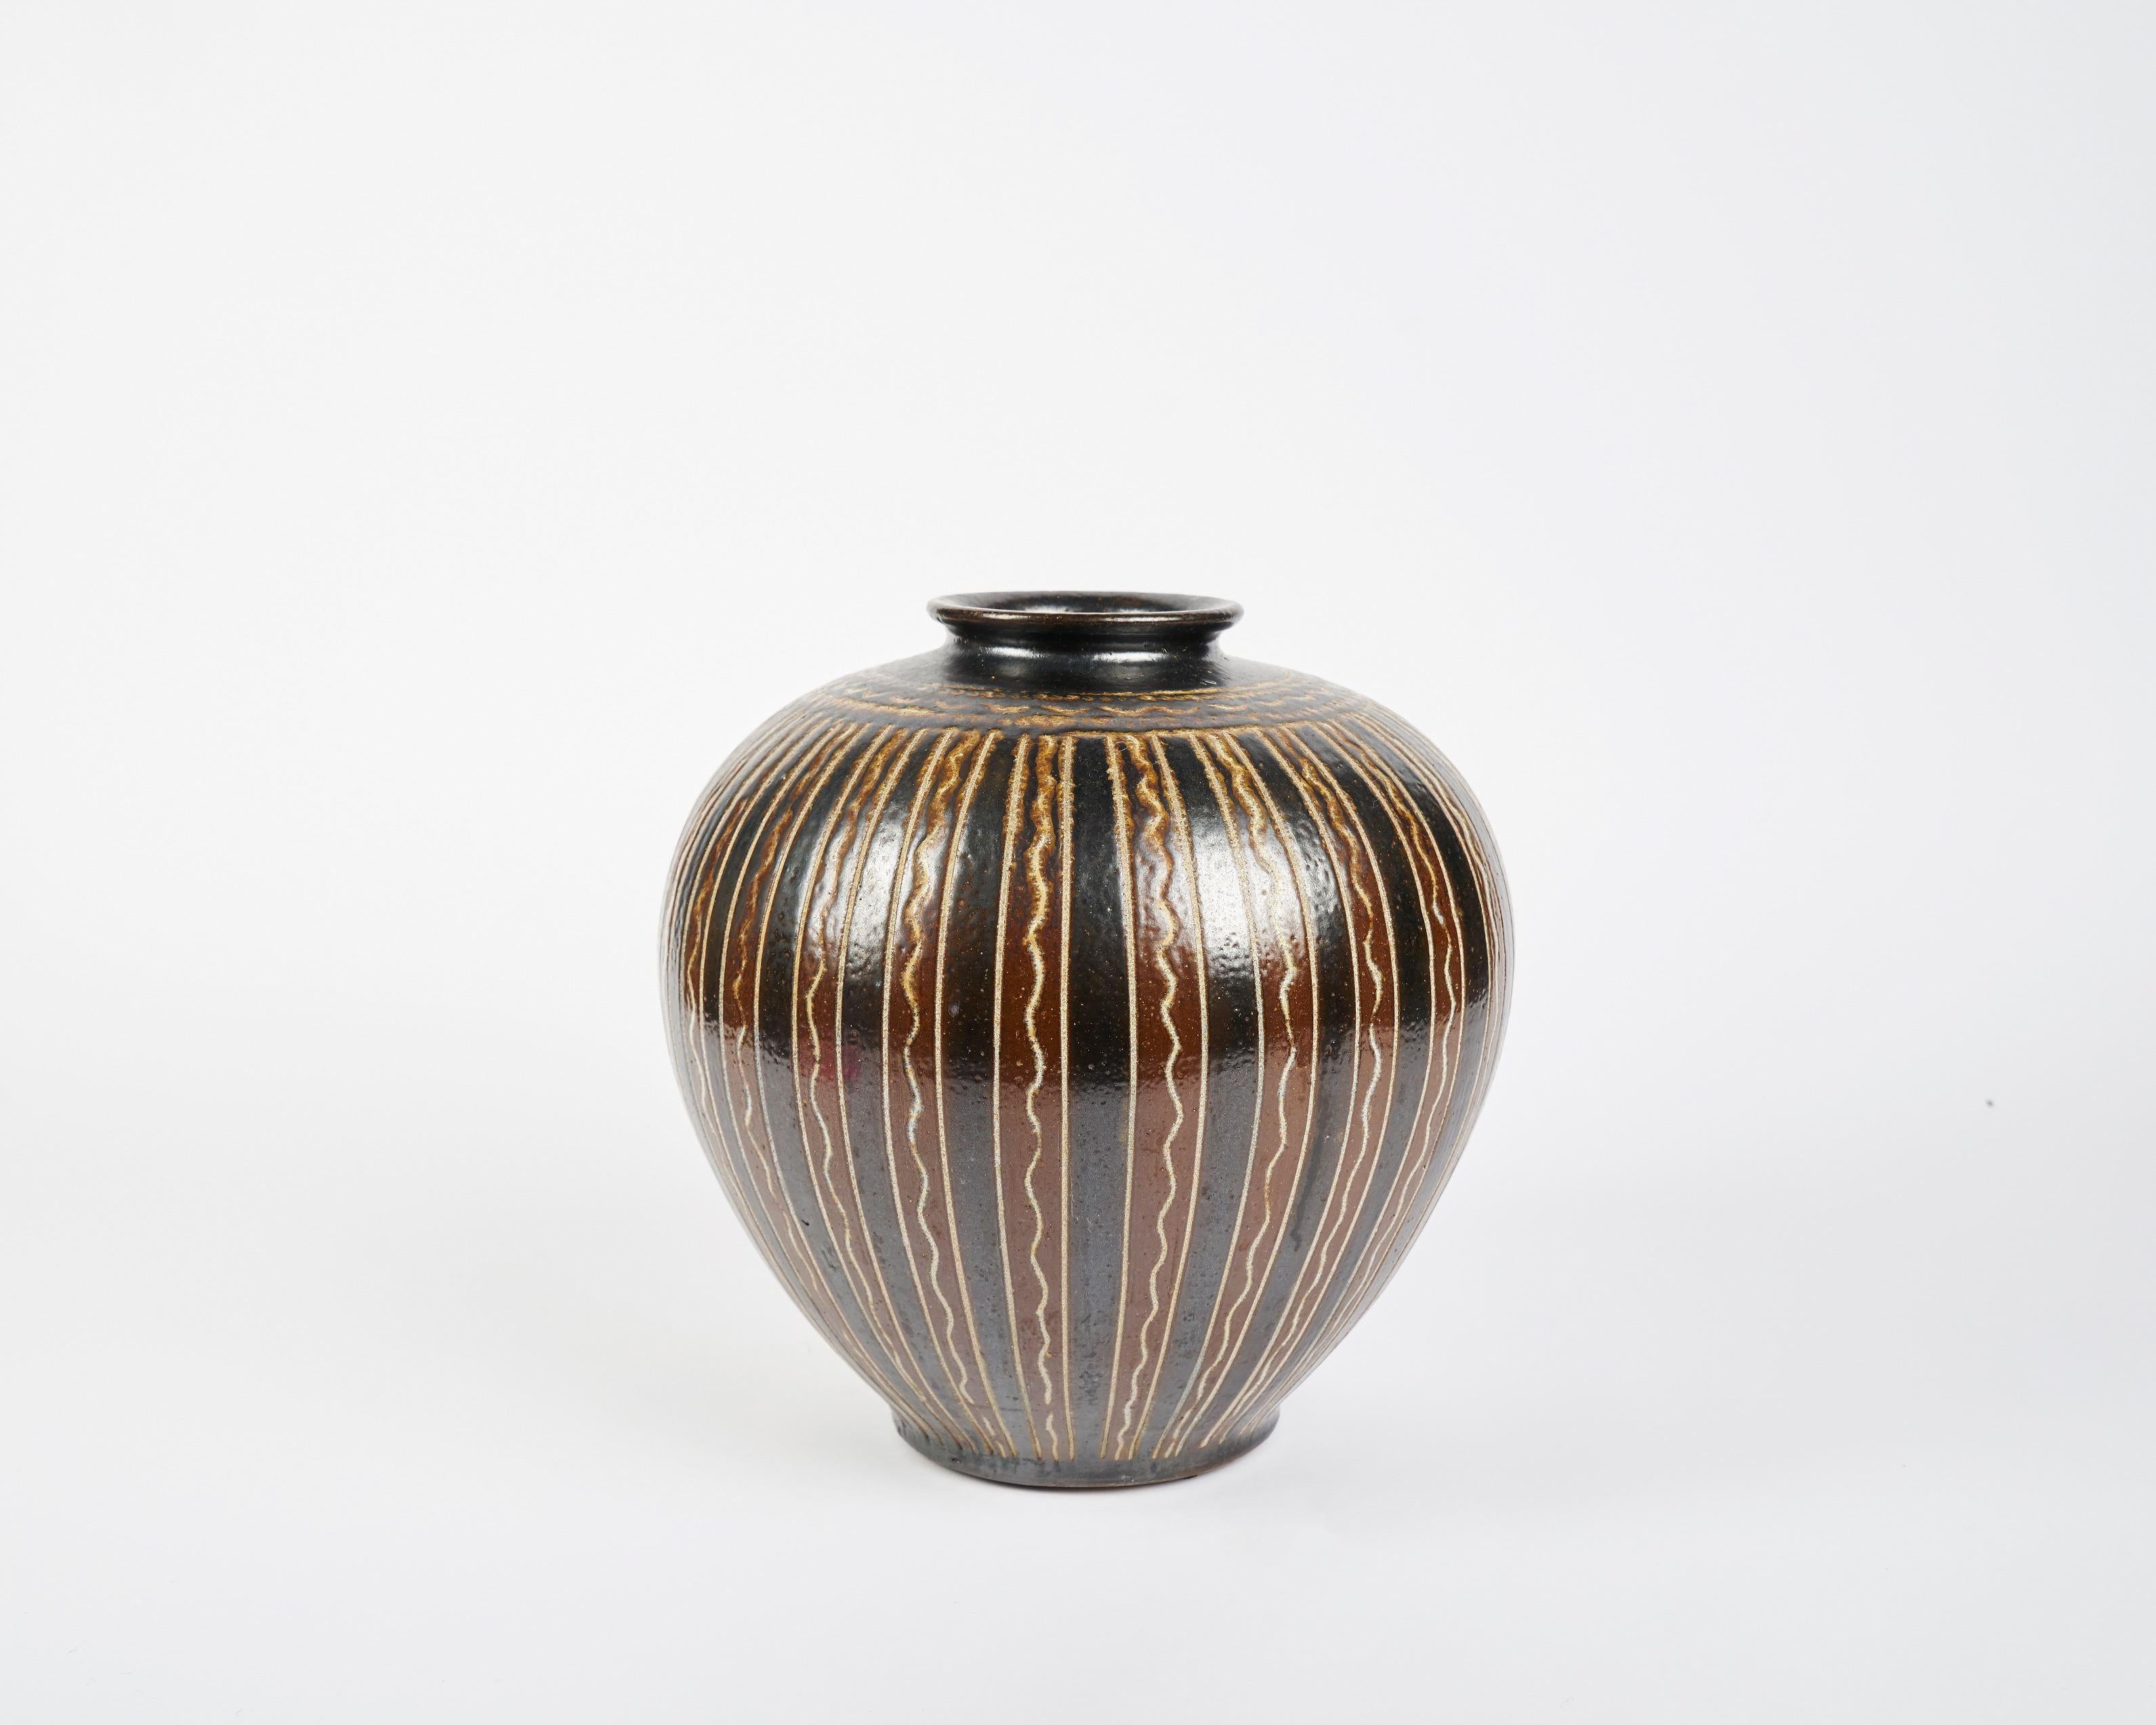 Created by the Swedish ceramist Arthur Andersson in the middle of the 20th century, these voluminous vases are noteworthy for their formal symmetry and their banded designs, which often run in either horizontal or vertical patterns of zig zag,